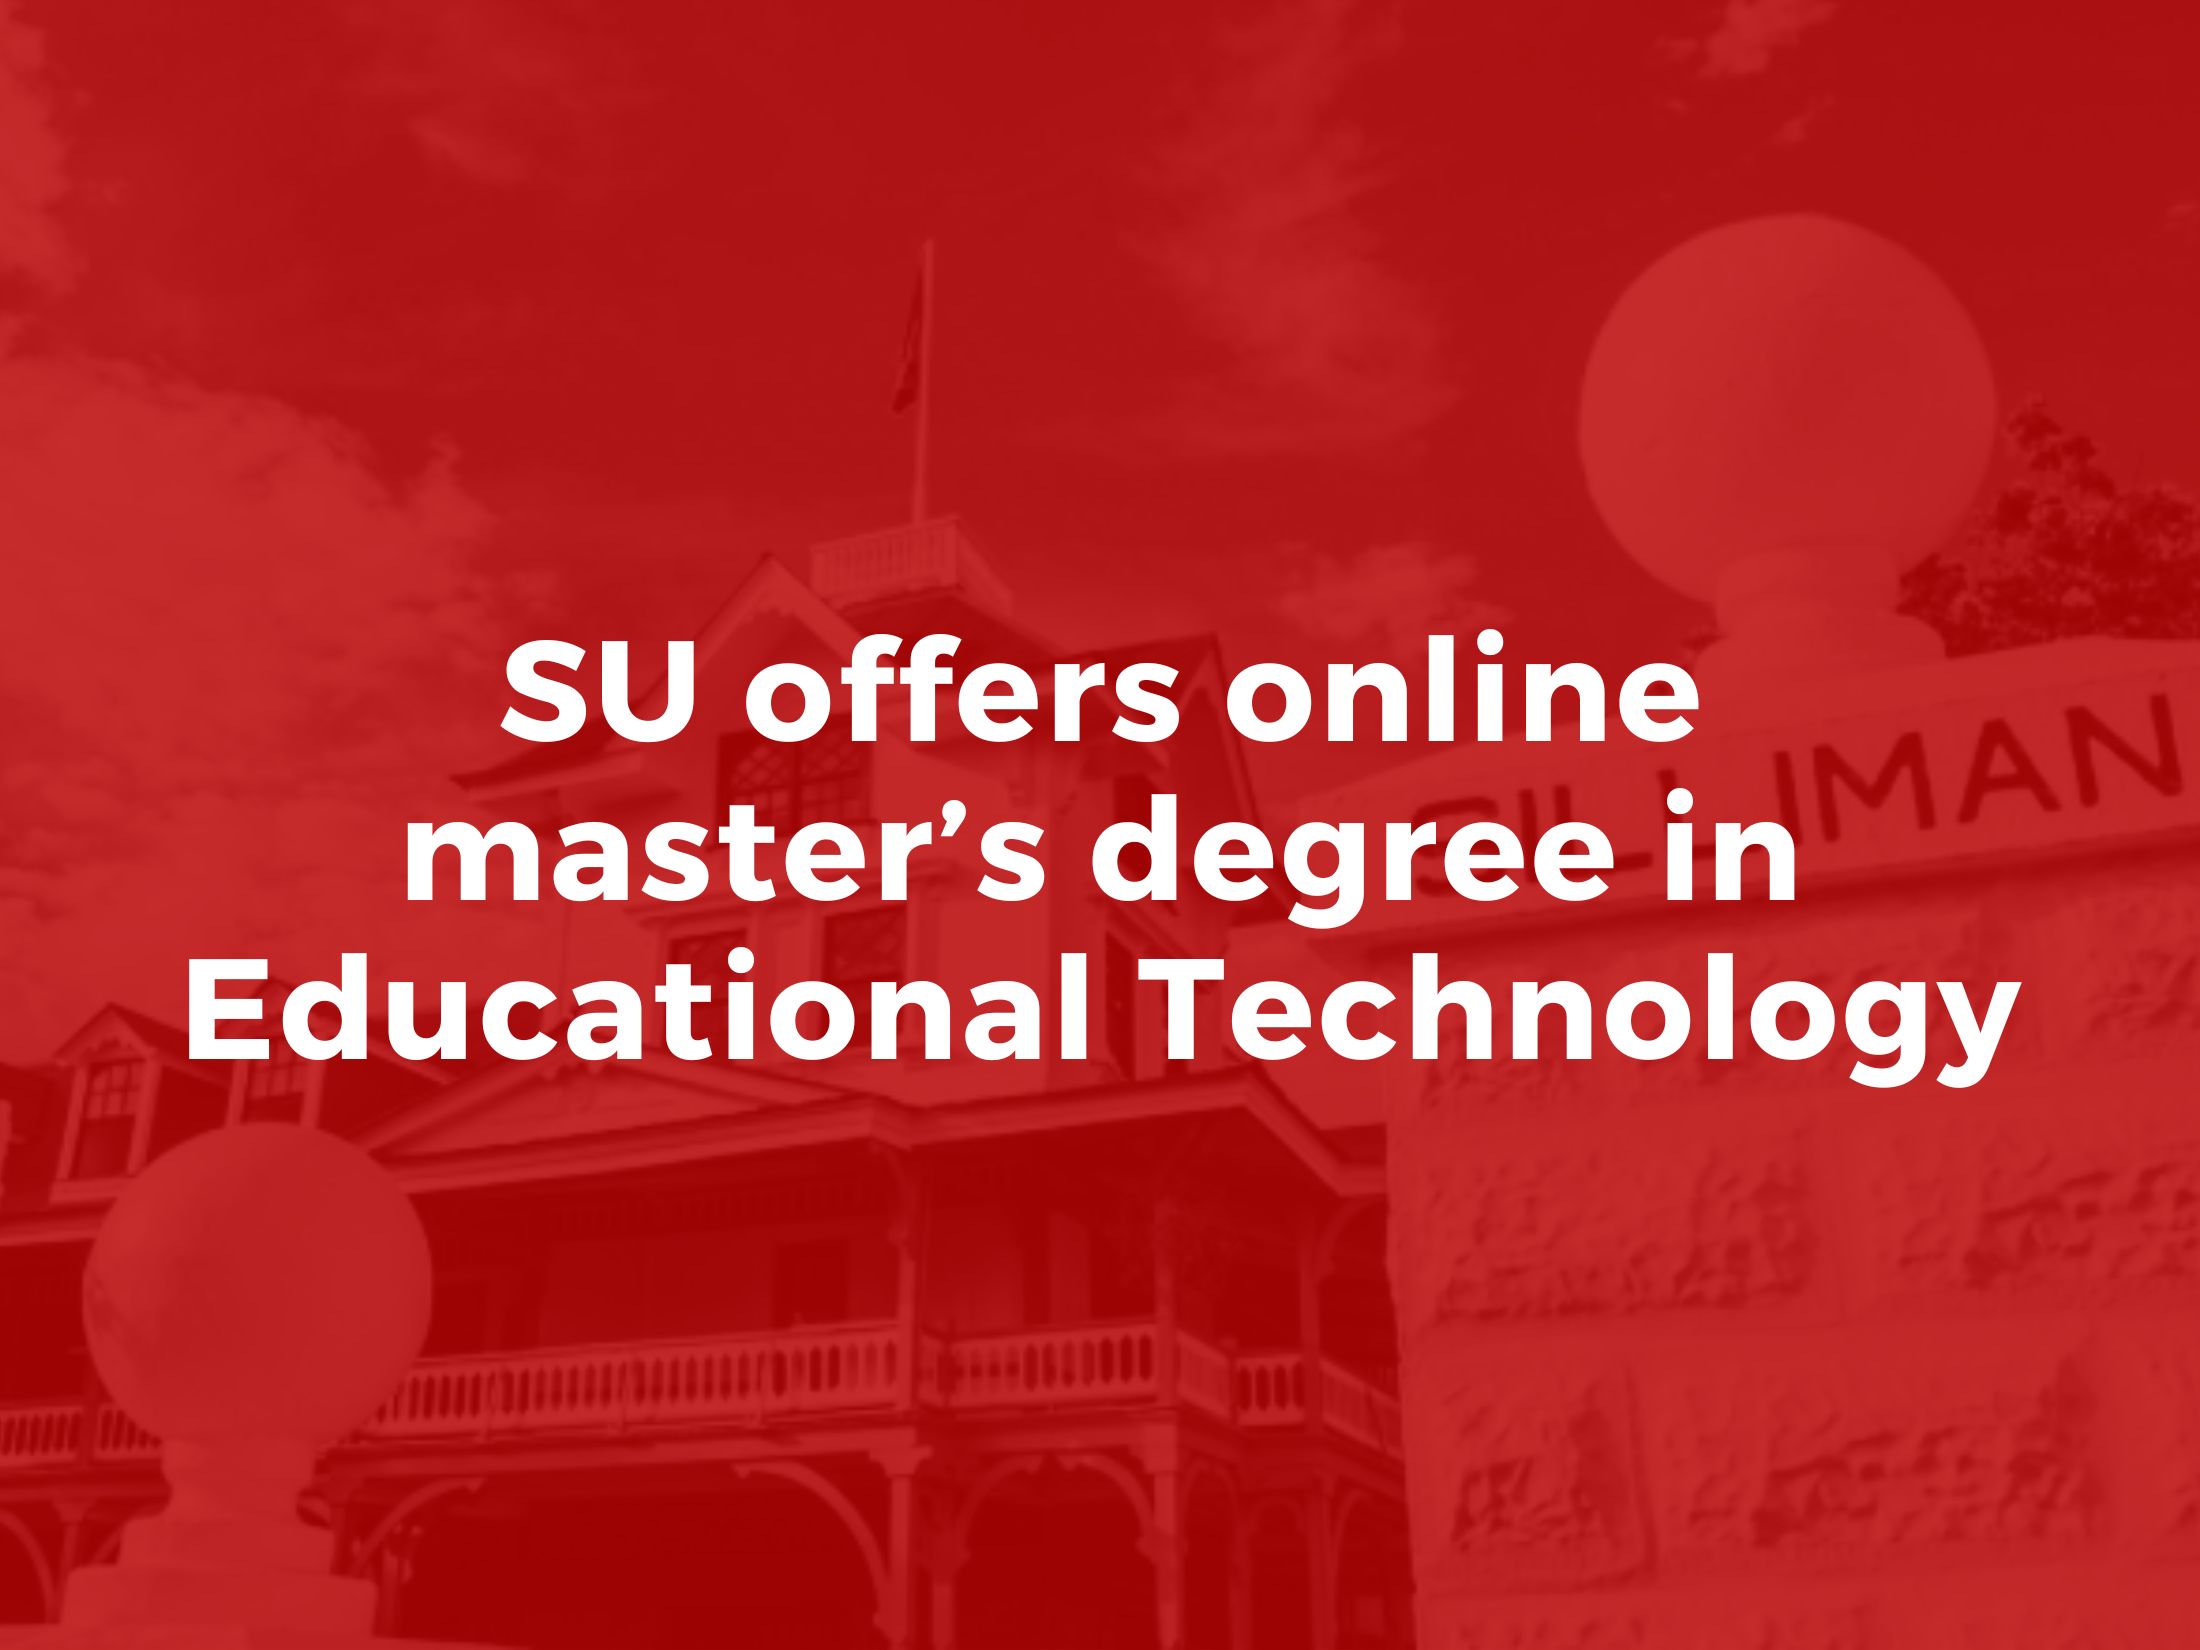 SU offers online master’s degree in Educational Technology